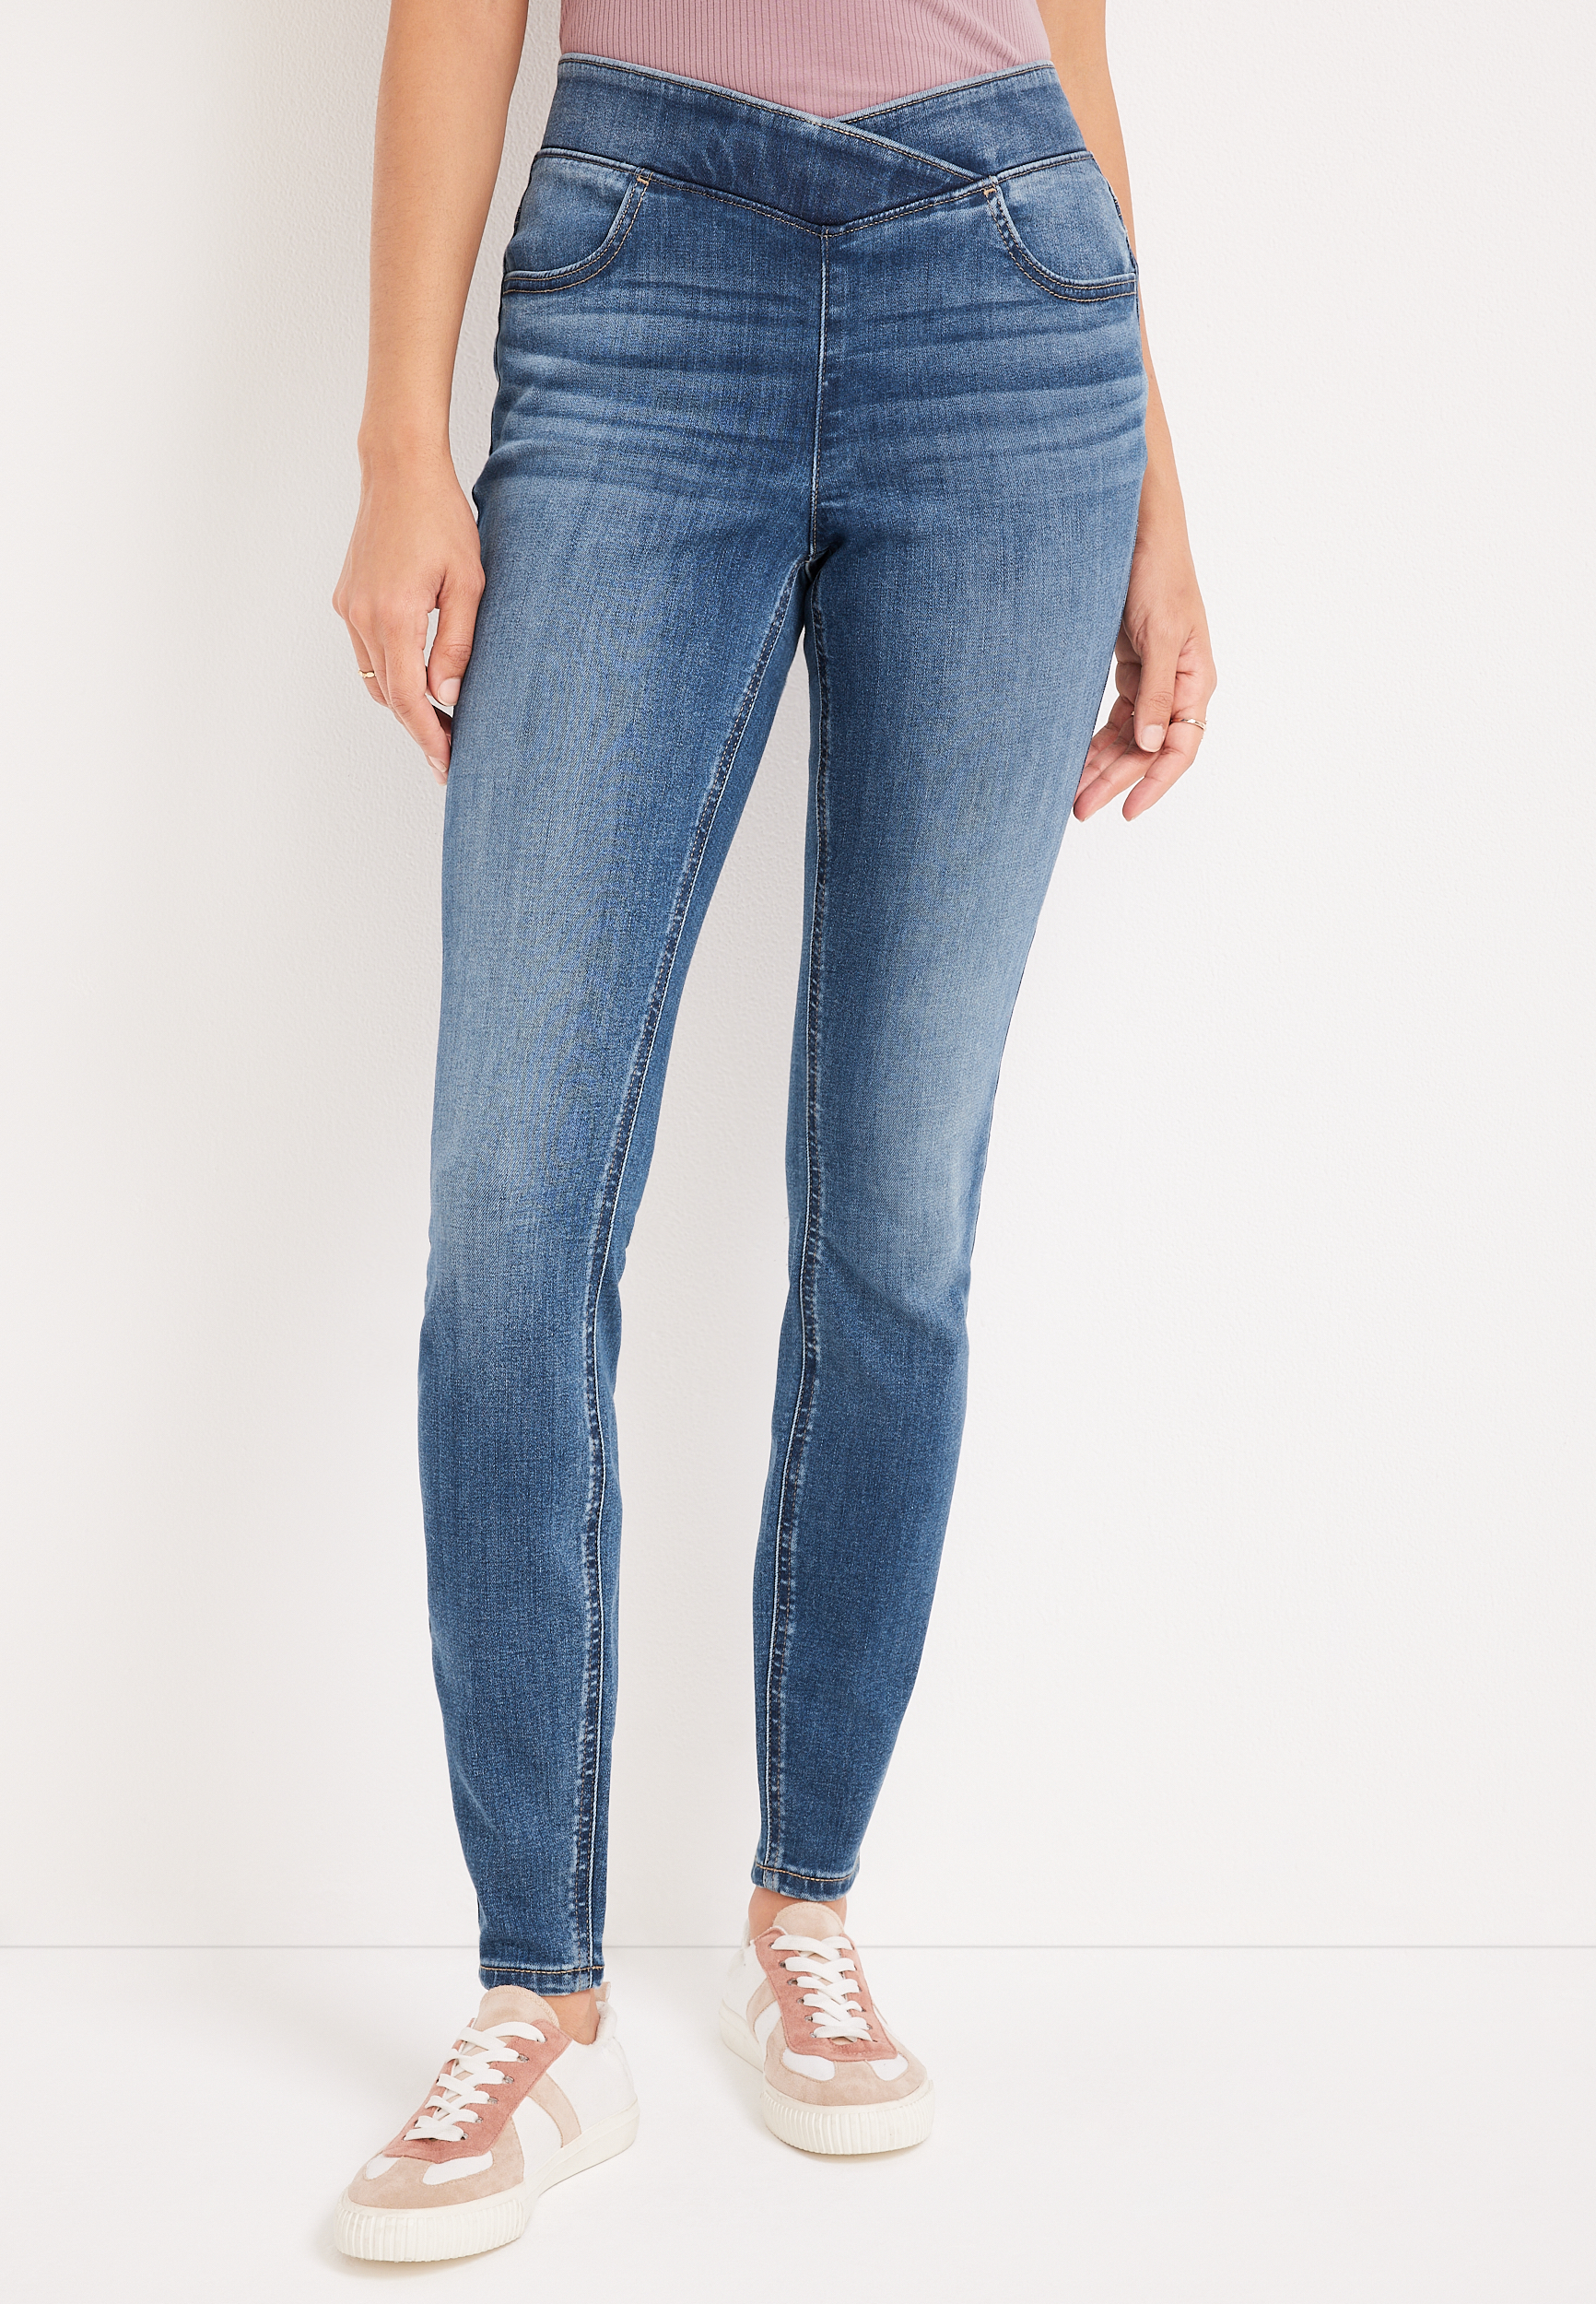 m jeans maurices™ Cool Comfort Crossover Pull On High Rise Jegging | maurices